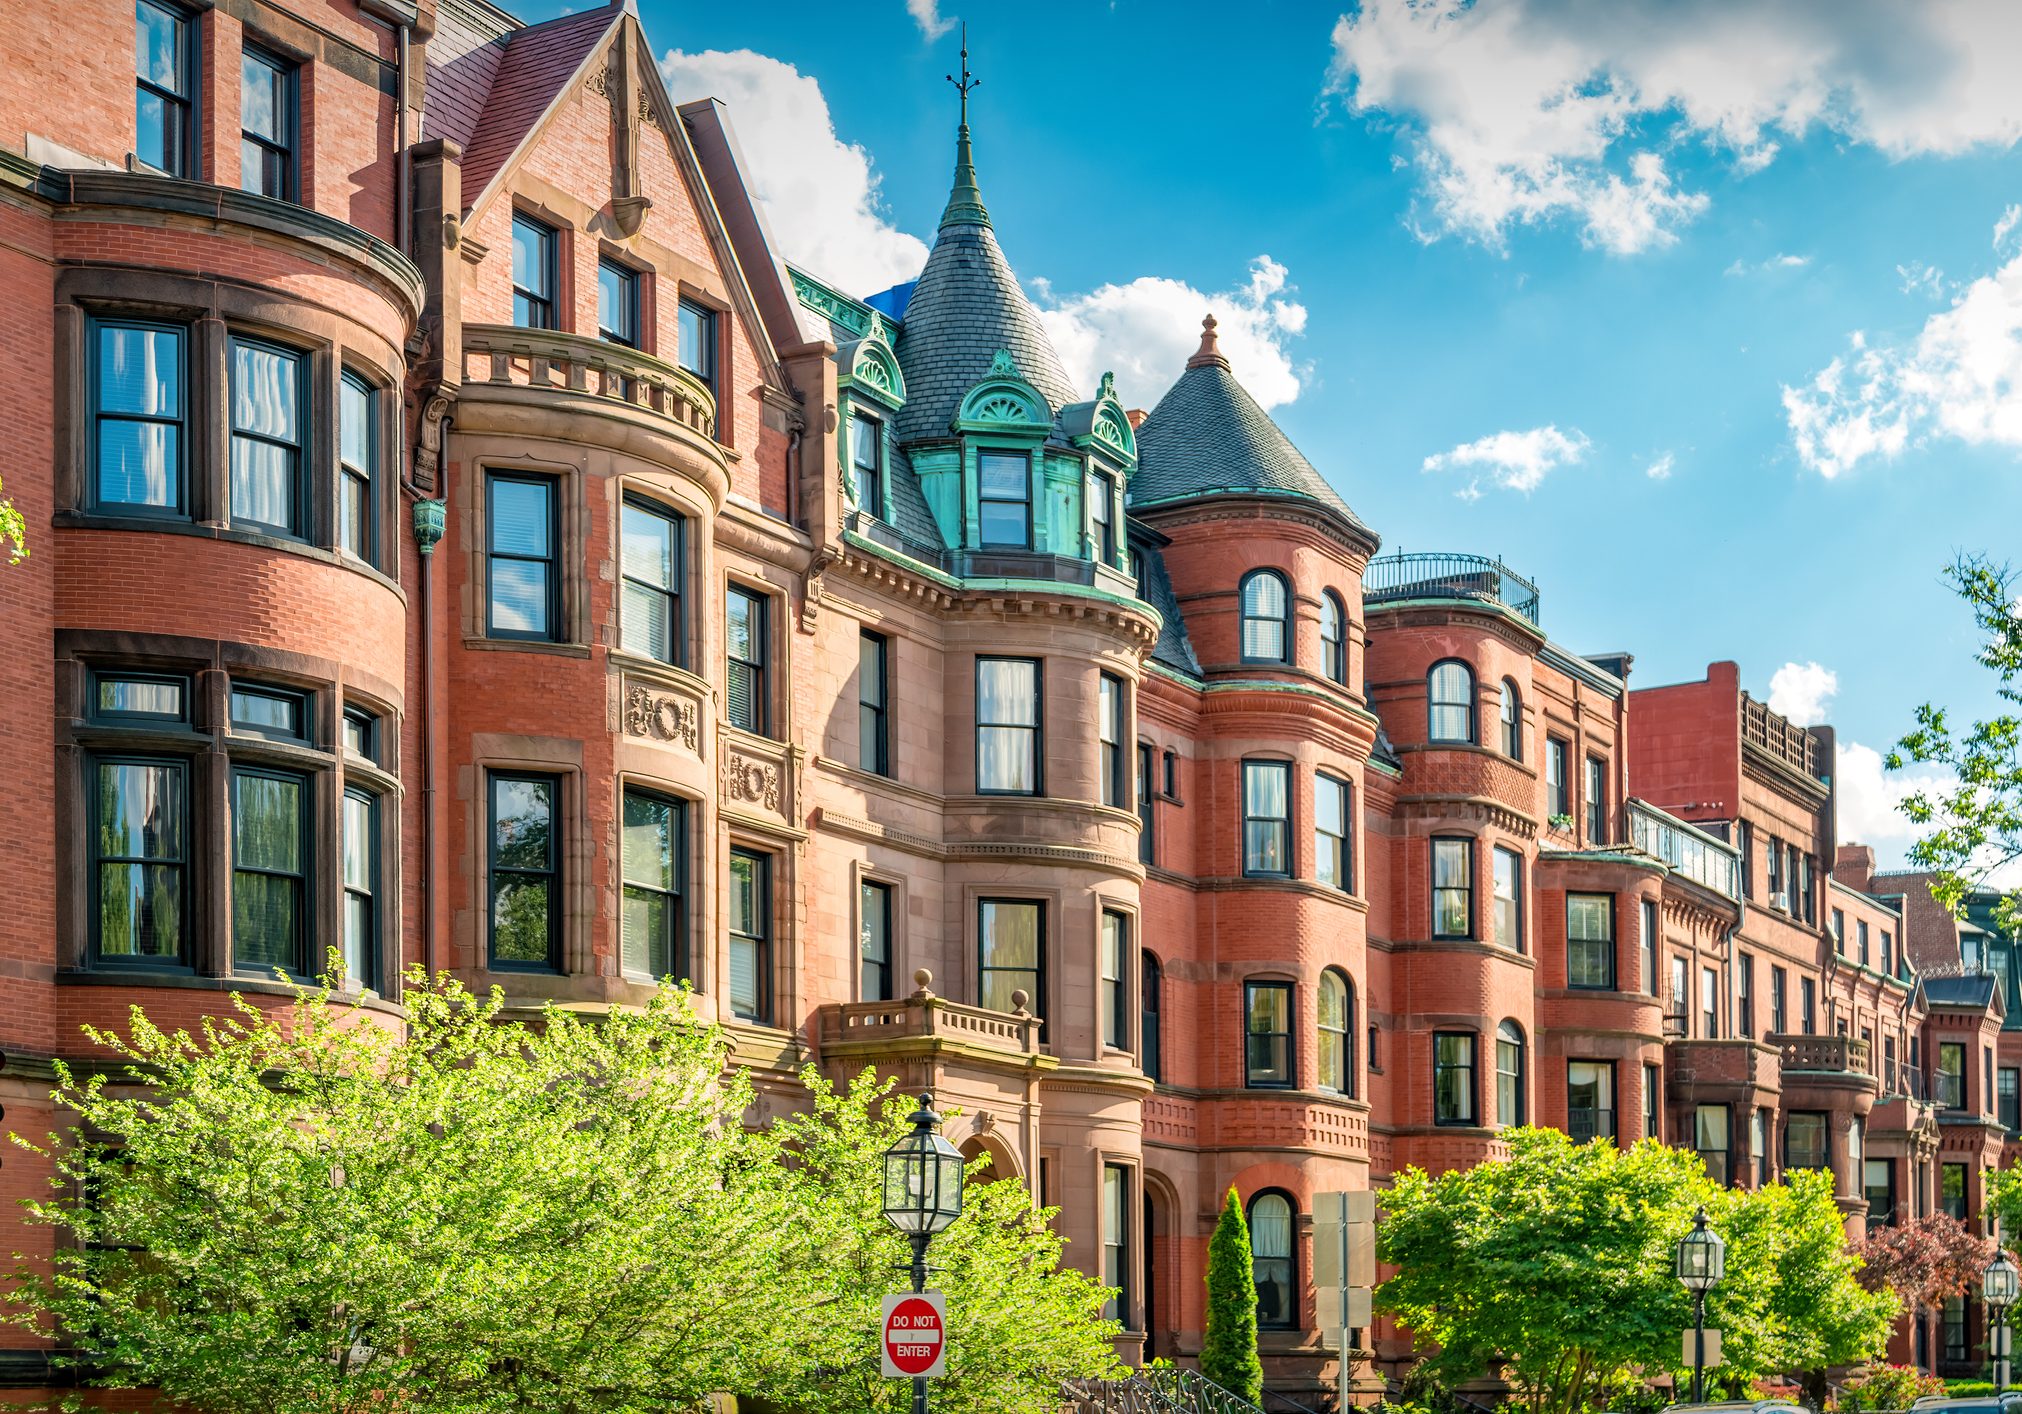 Typical brownstone townhouses in Back Bay district of downtown Boston, Massachusetts, USA on a sunny day.